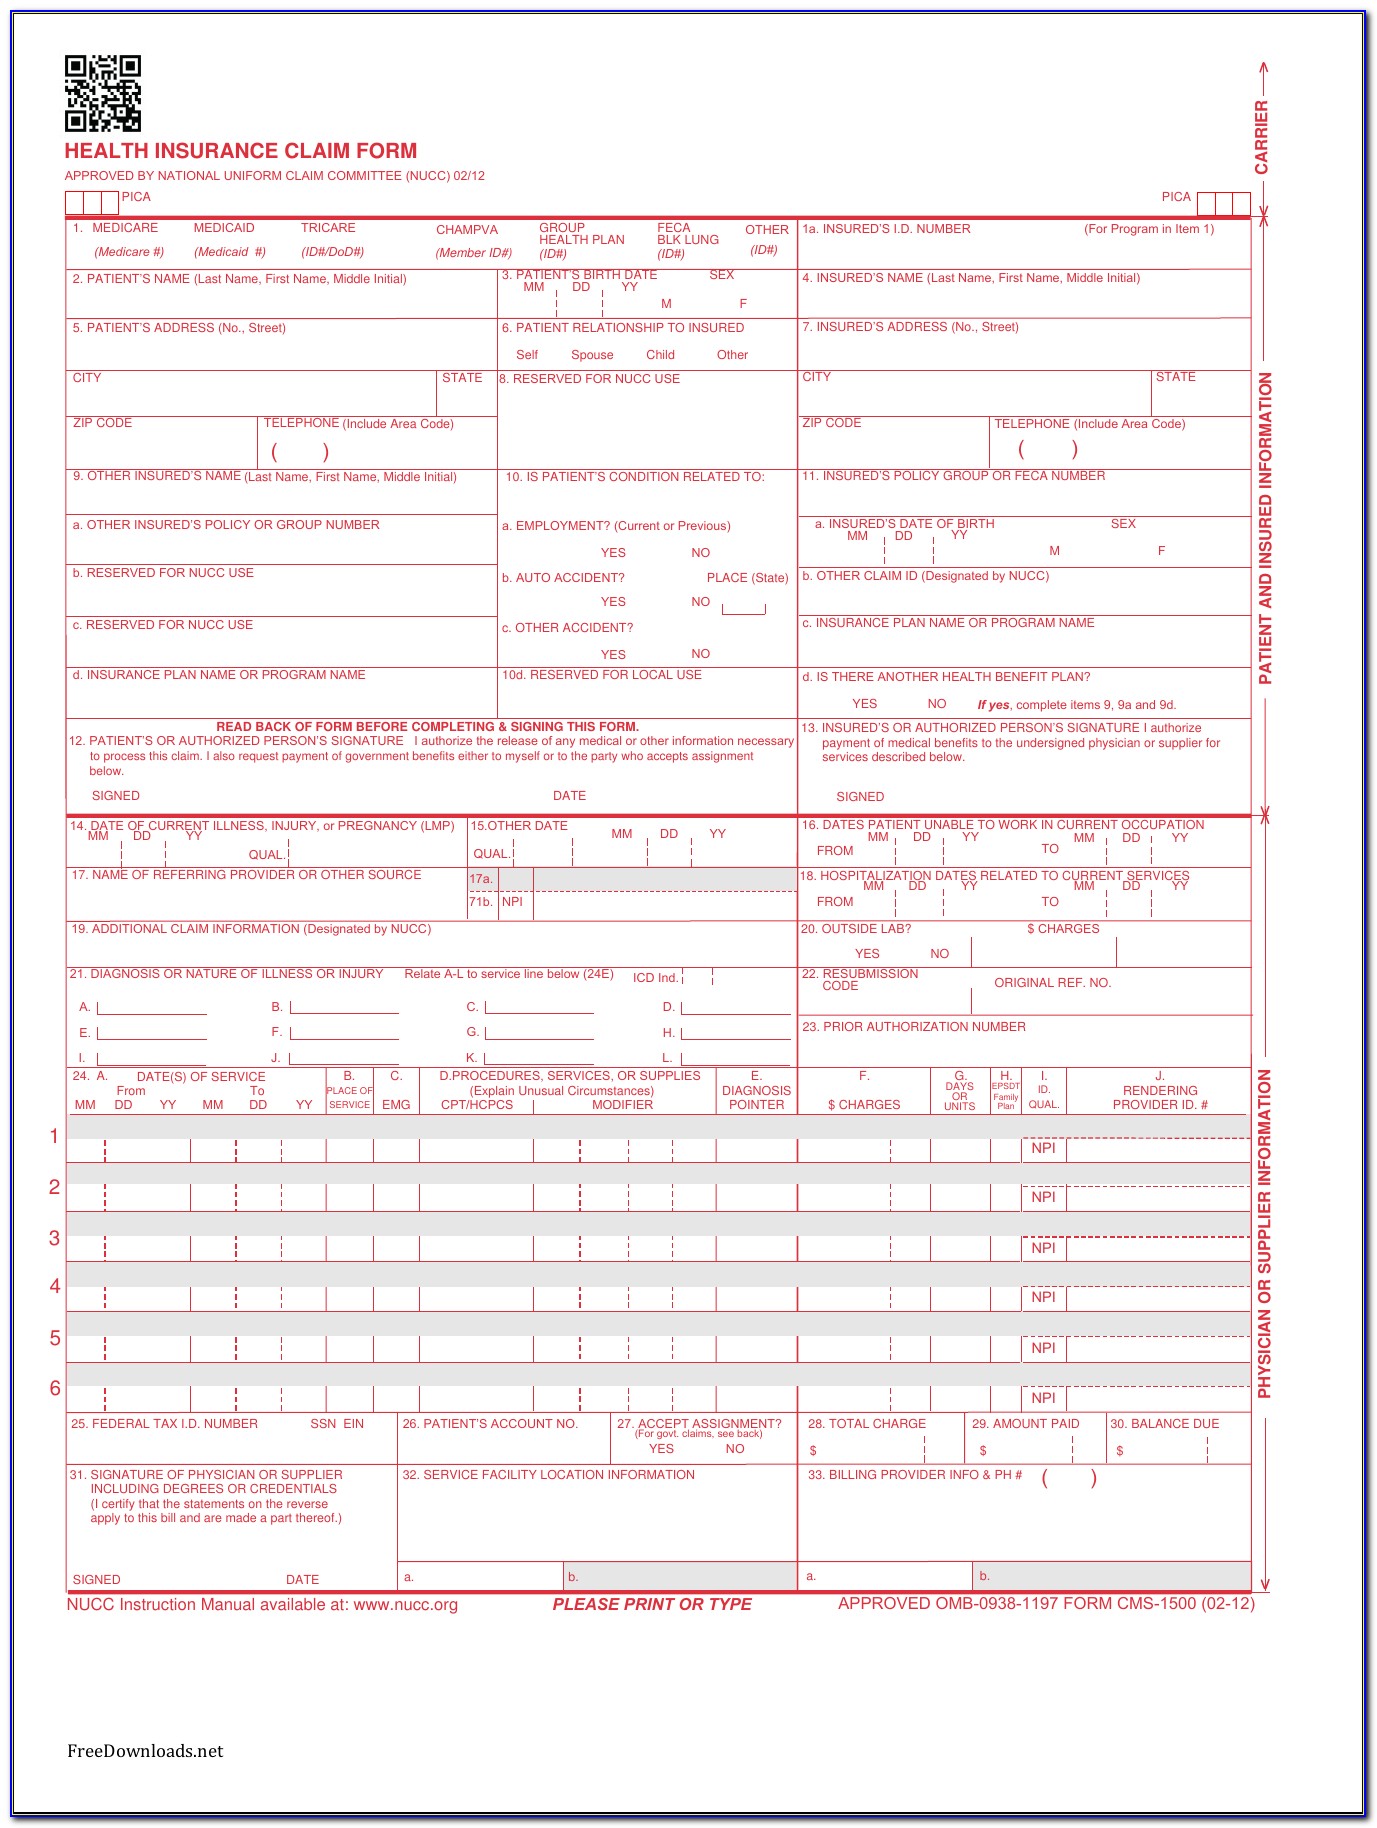 Cms 1500 Form Filling Instructions